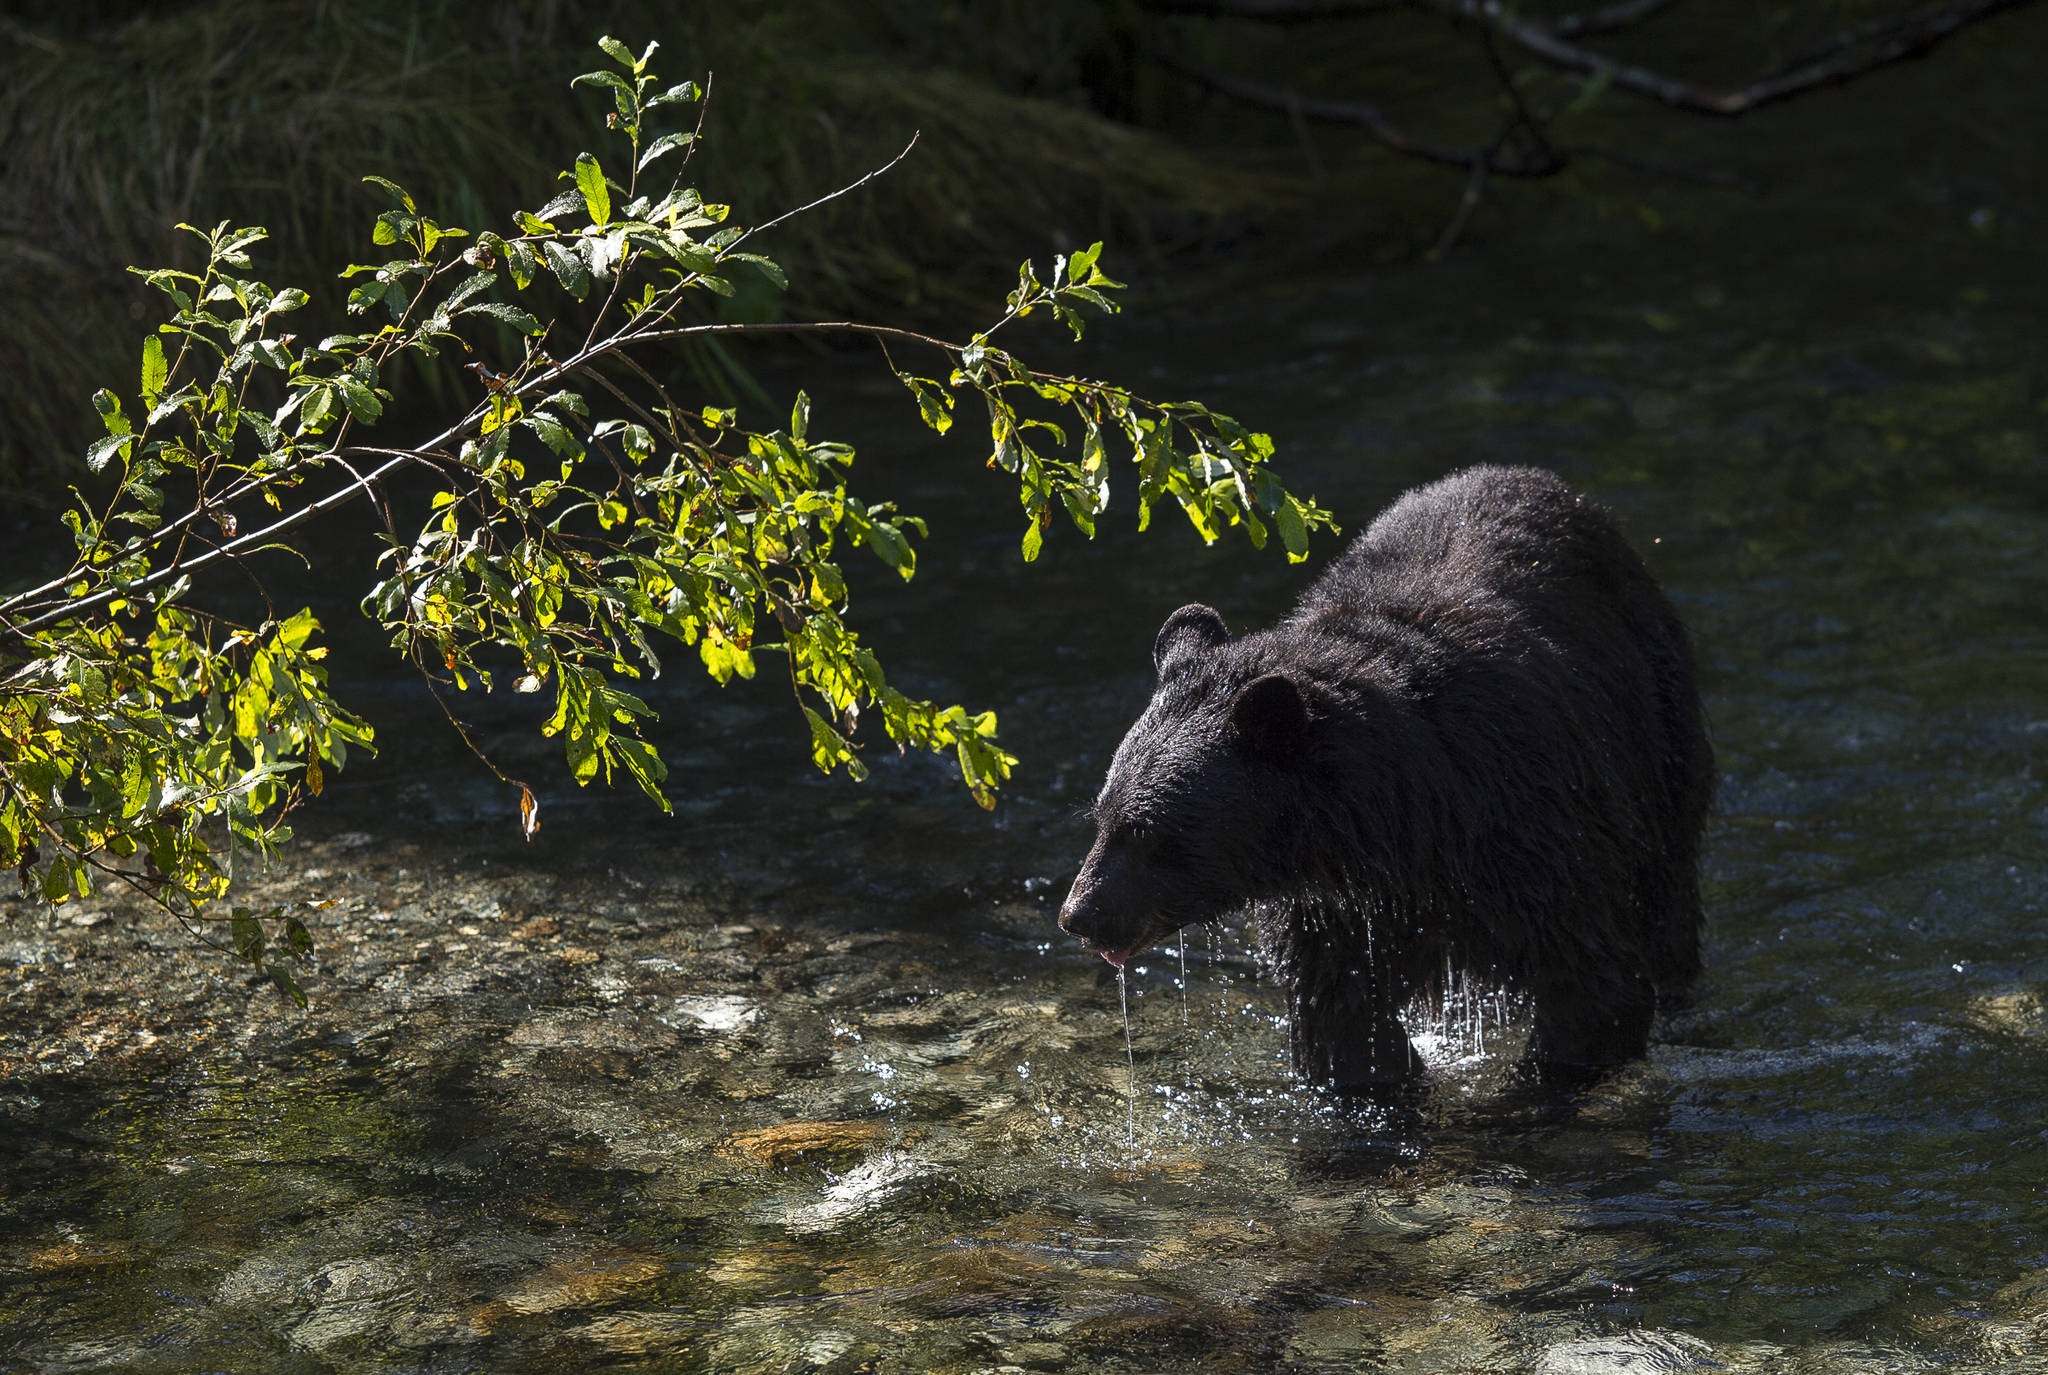 A black bear drips water after an unsuccessful chase of sockeye salmon in Steep Creek at the Mendenhall Glacier Visitor Center in September 2018. (Michael Penn | Juneau Empire File)